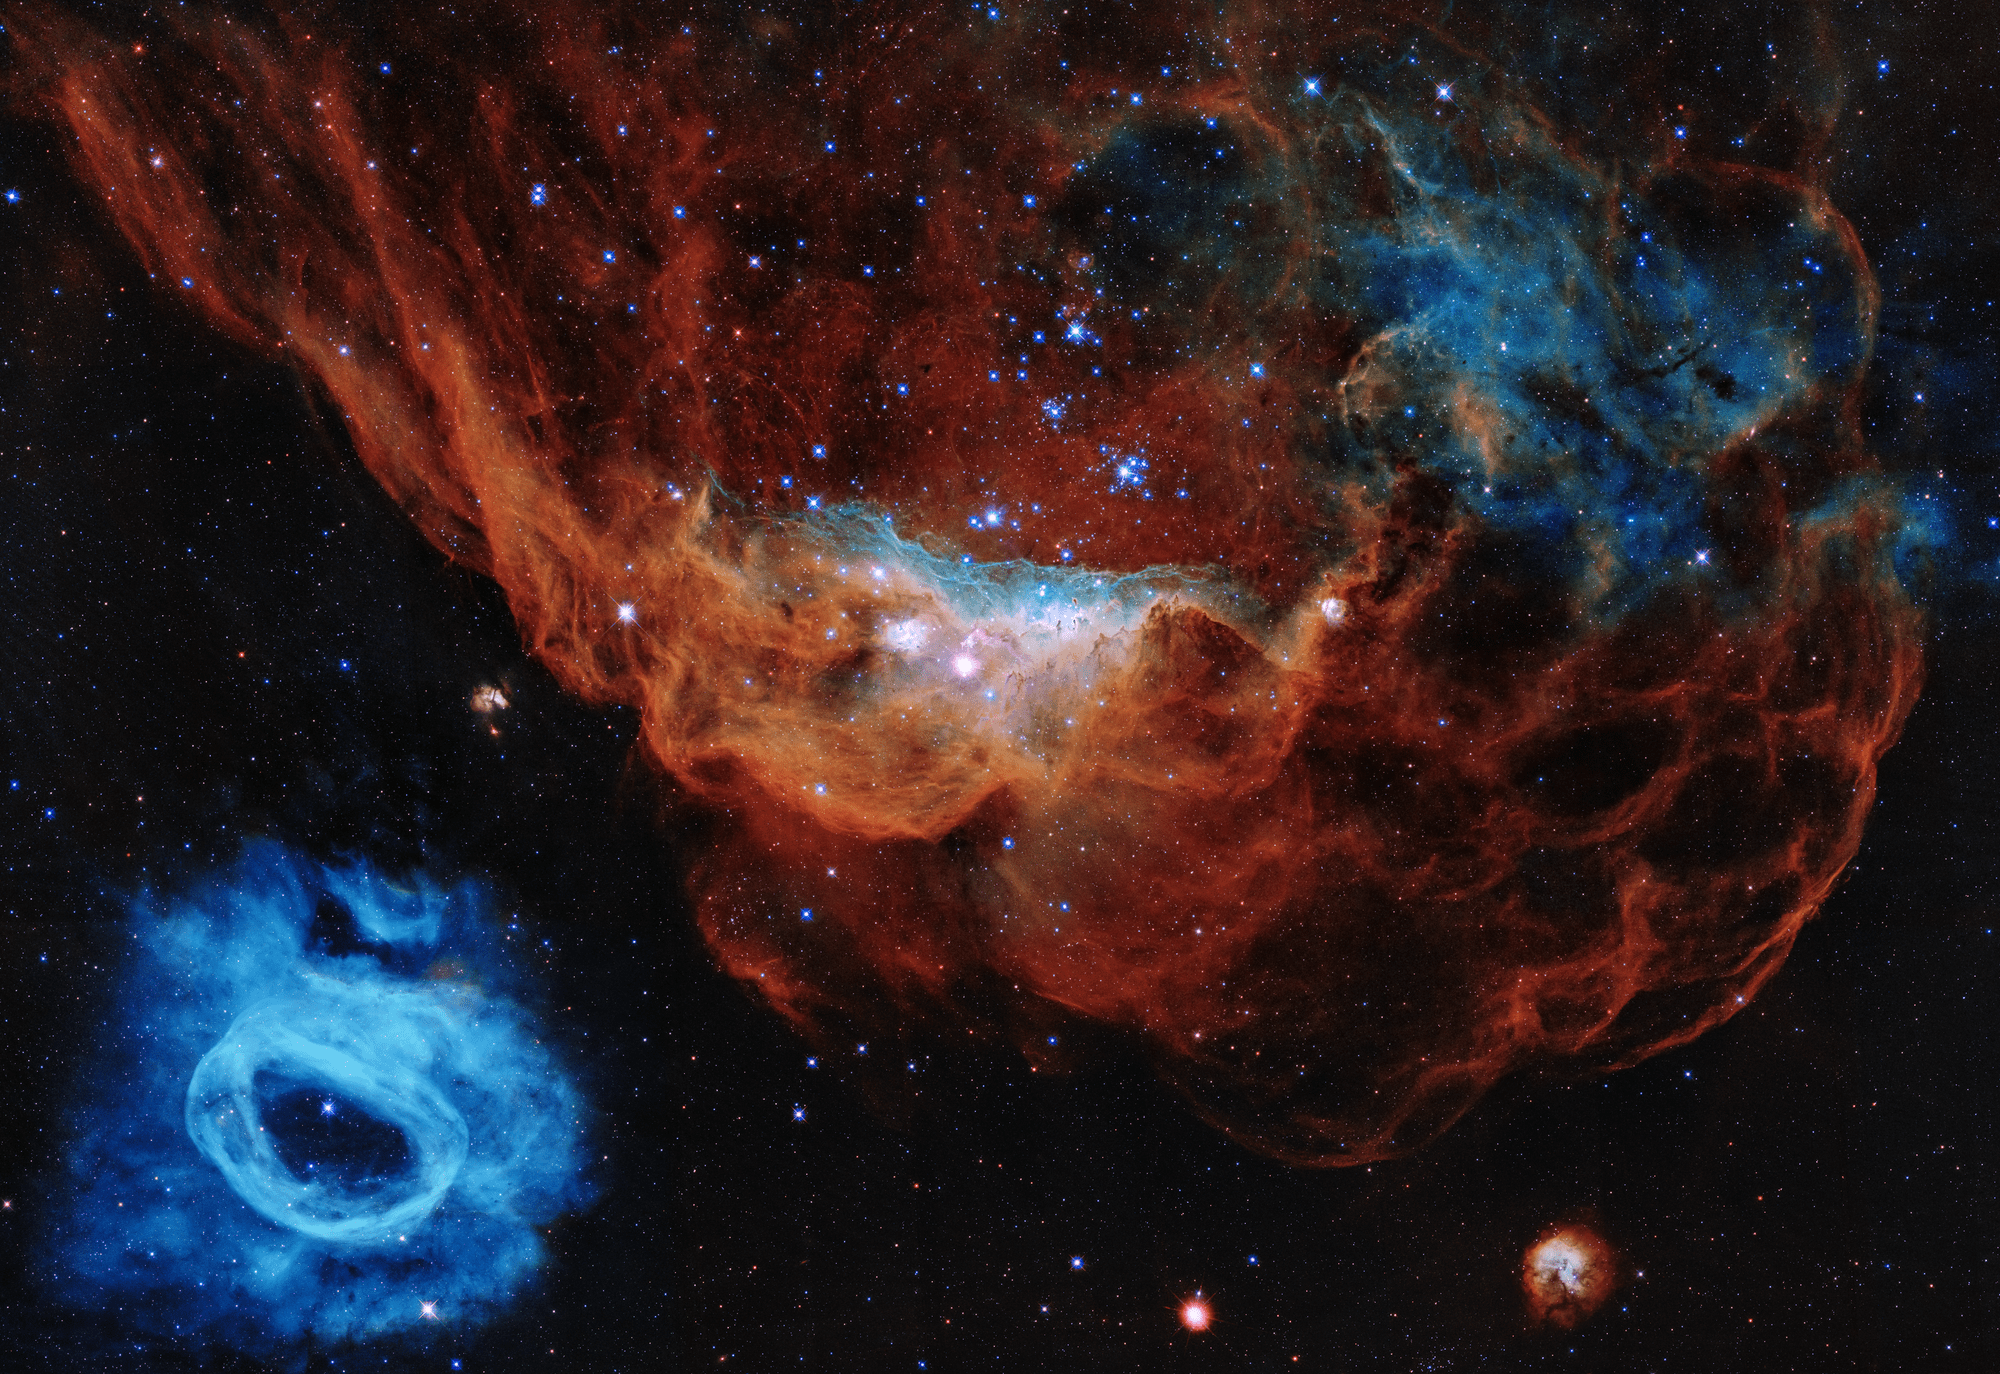 A large, red, nebula of dust and gas at the top right portion of the image with a small blue bubble at the bottom left.